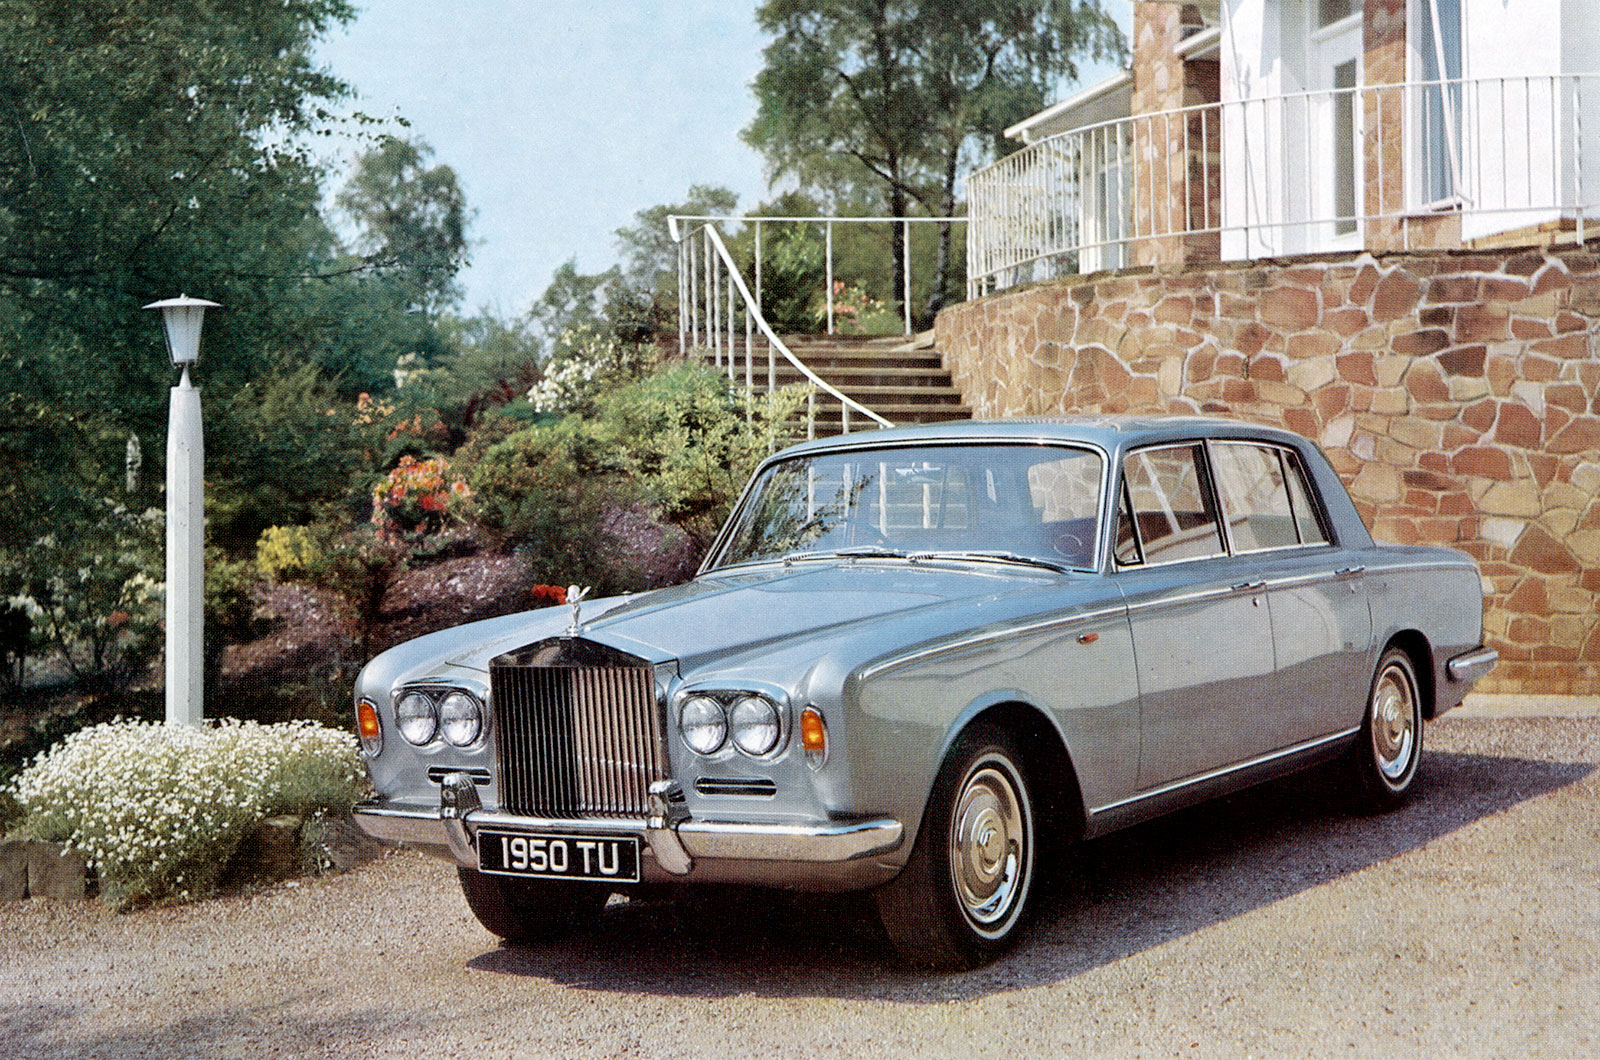 <p>Rolls-Royce’s L Series <strong>V8</strong> made its first appearance as a 6230cc engine in the <strong>Silver Cloud II of 1959</strong>. This increased in 1968 to 6750cc and has remained the same ever since, with the engine still in production today in Bentley’s <strong>Mulsanne</strong>. It’s estimated this engine has powered <strong>70%</strong> of Rolls-Royce cars ever made.</p><p>The secret to this engine’s long life was it started out very <strong>under-stressed</strong> and has been gradually increased in power over time, with the help of turbocharging from 1982-on in most <strong>Bentley</strong> models. The all-aluminum motor was deliberately designed to fit in the long, narrow bay of the Cloud II, which is why the motor’s ‘V’ between each bank of cylinders is so deep.</p>